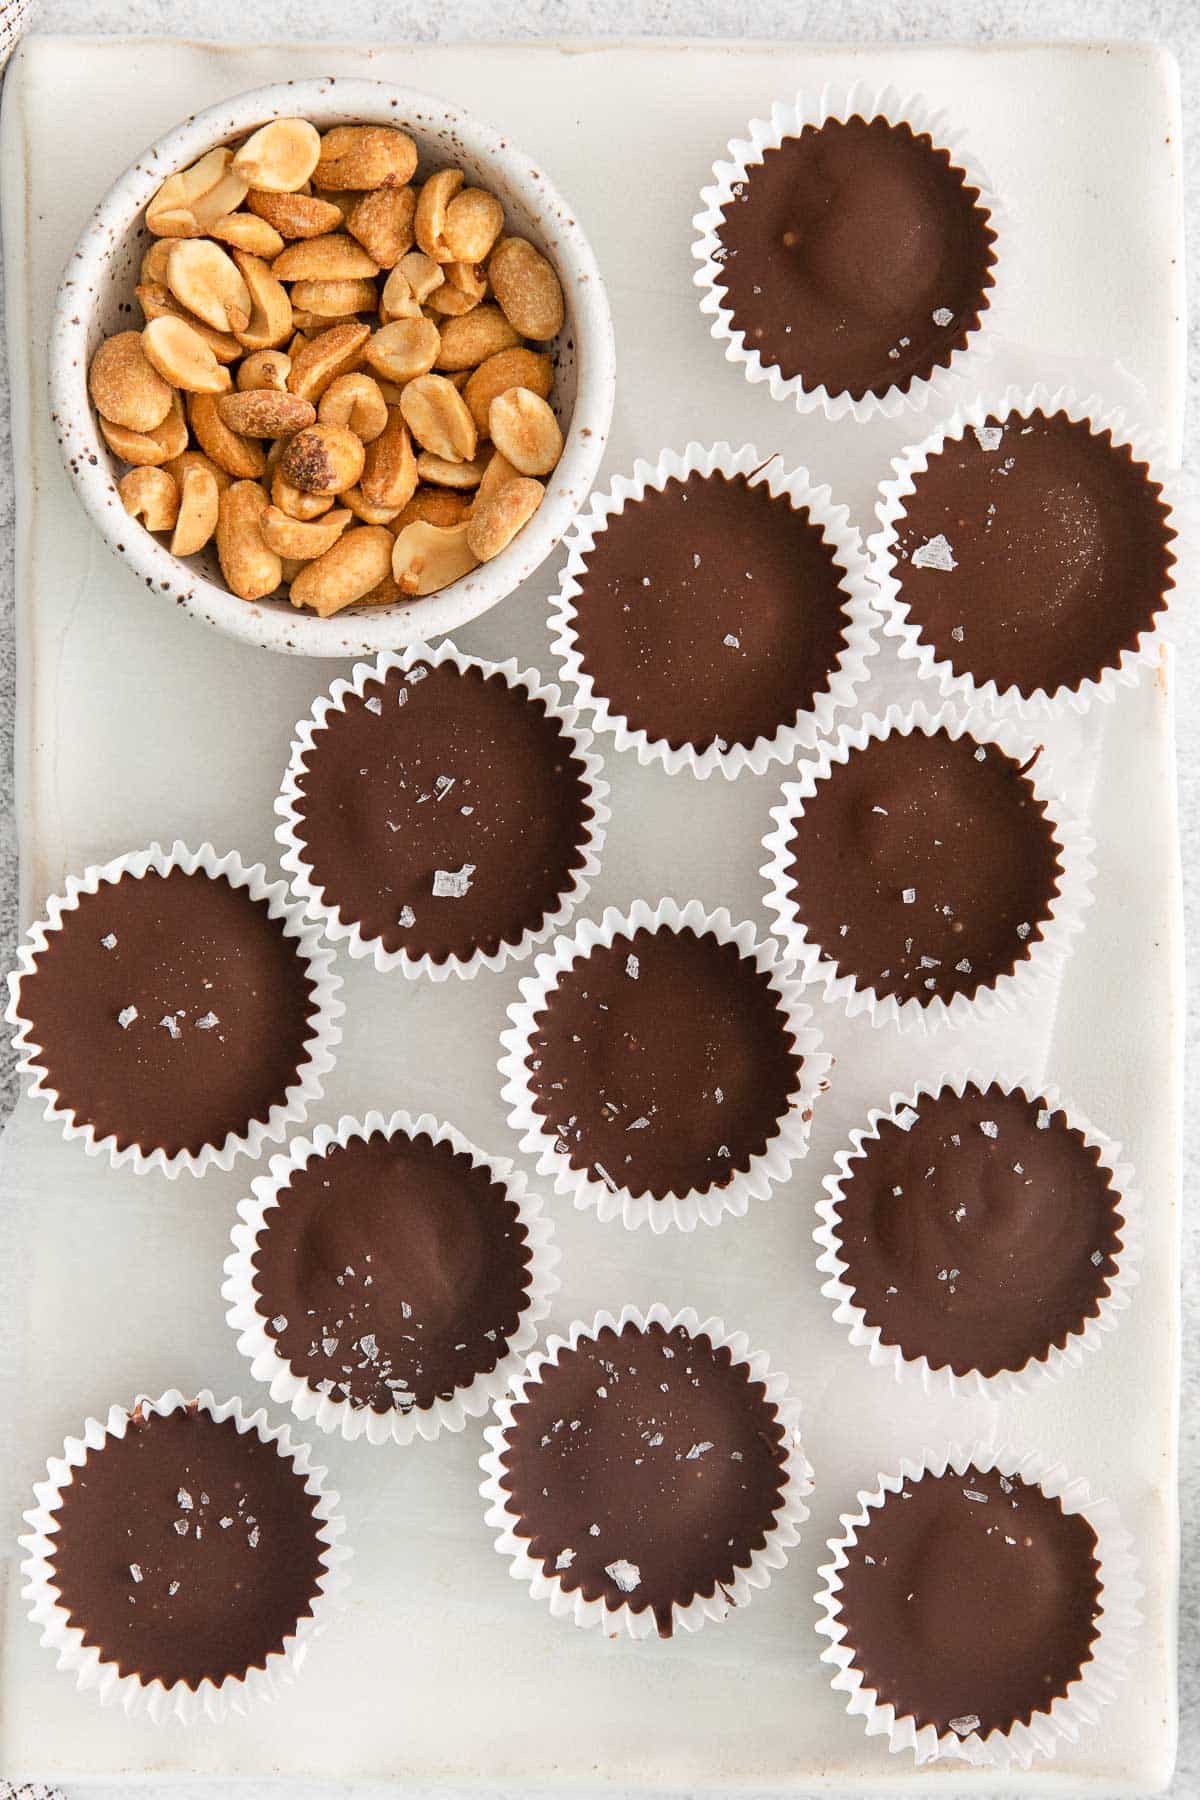 several peanut butter cups in white paper liners on a white countertop.